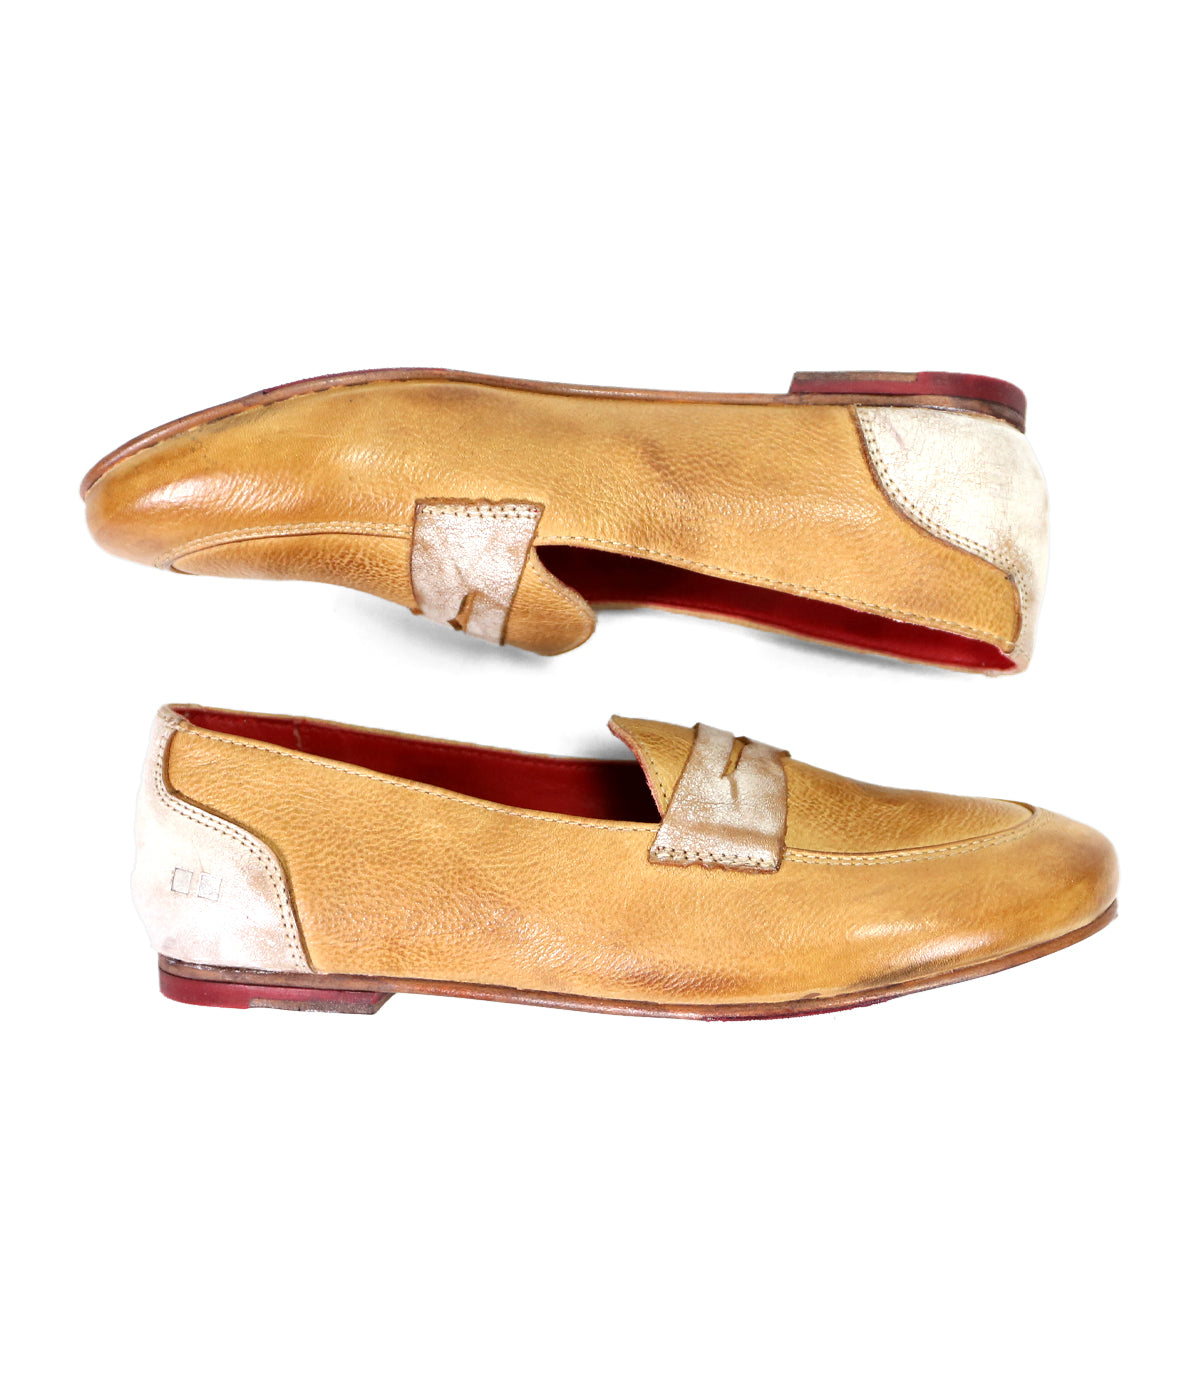 A pair of elegant tan two-tone leather Ballet loafers by Bed Stu with white detailing and a bow on top, photographed against a white background.